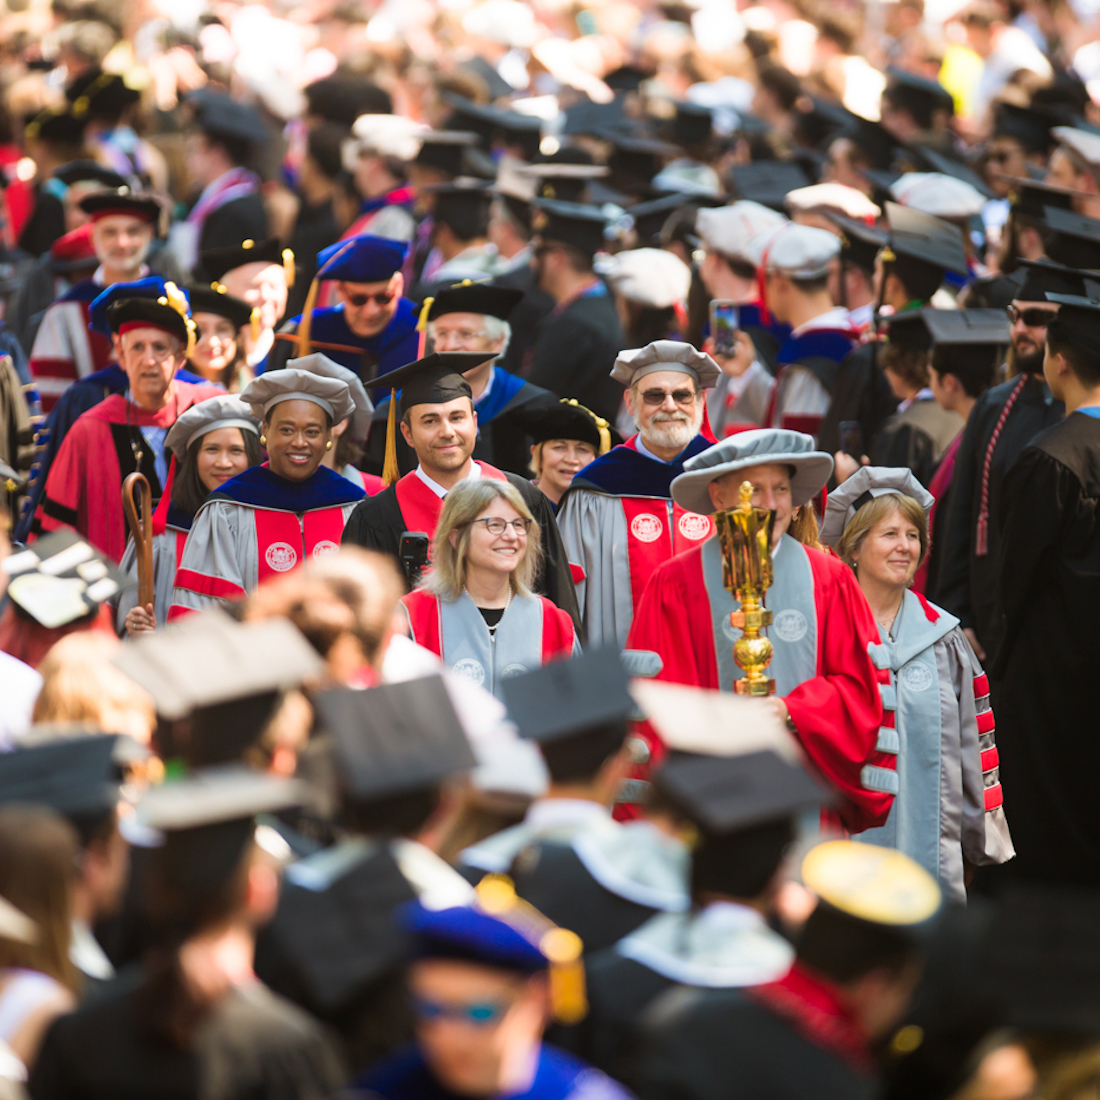 Stephen D. Baker ’84 MArch ’88 led the procession of faculty and administration to the stage carrying the ceremonial golden mace. MIT President Sally Kornbluth walked on his right, and Corporation Chair Diane Greene SM ’78 walked on his left. Image: Gretchen Ertl